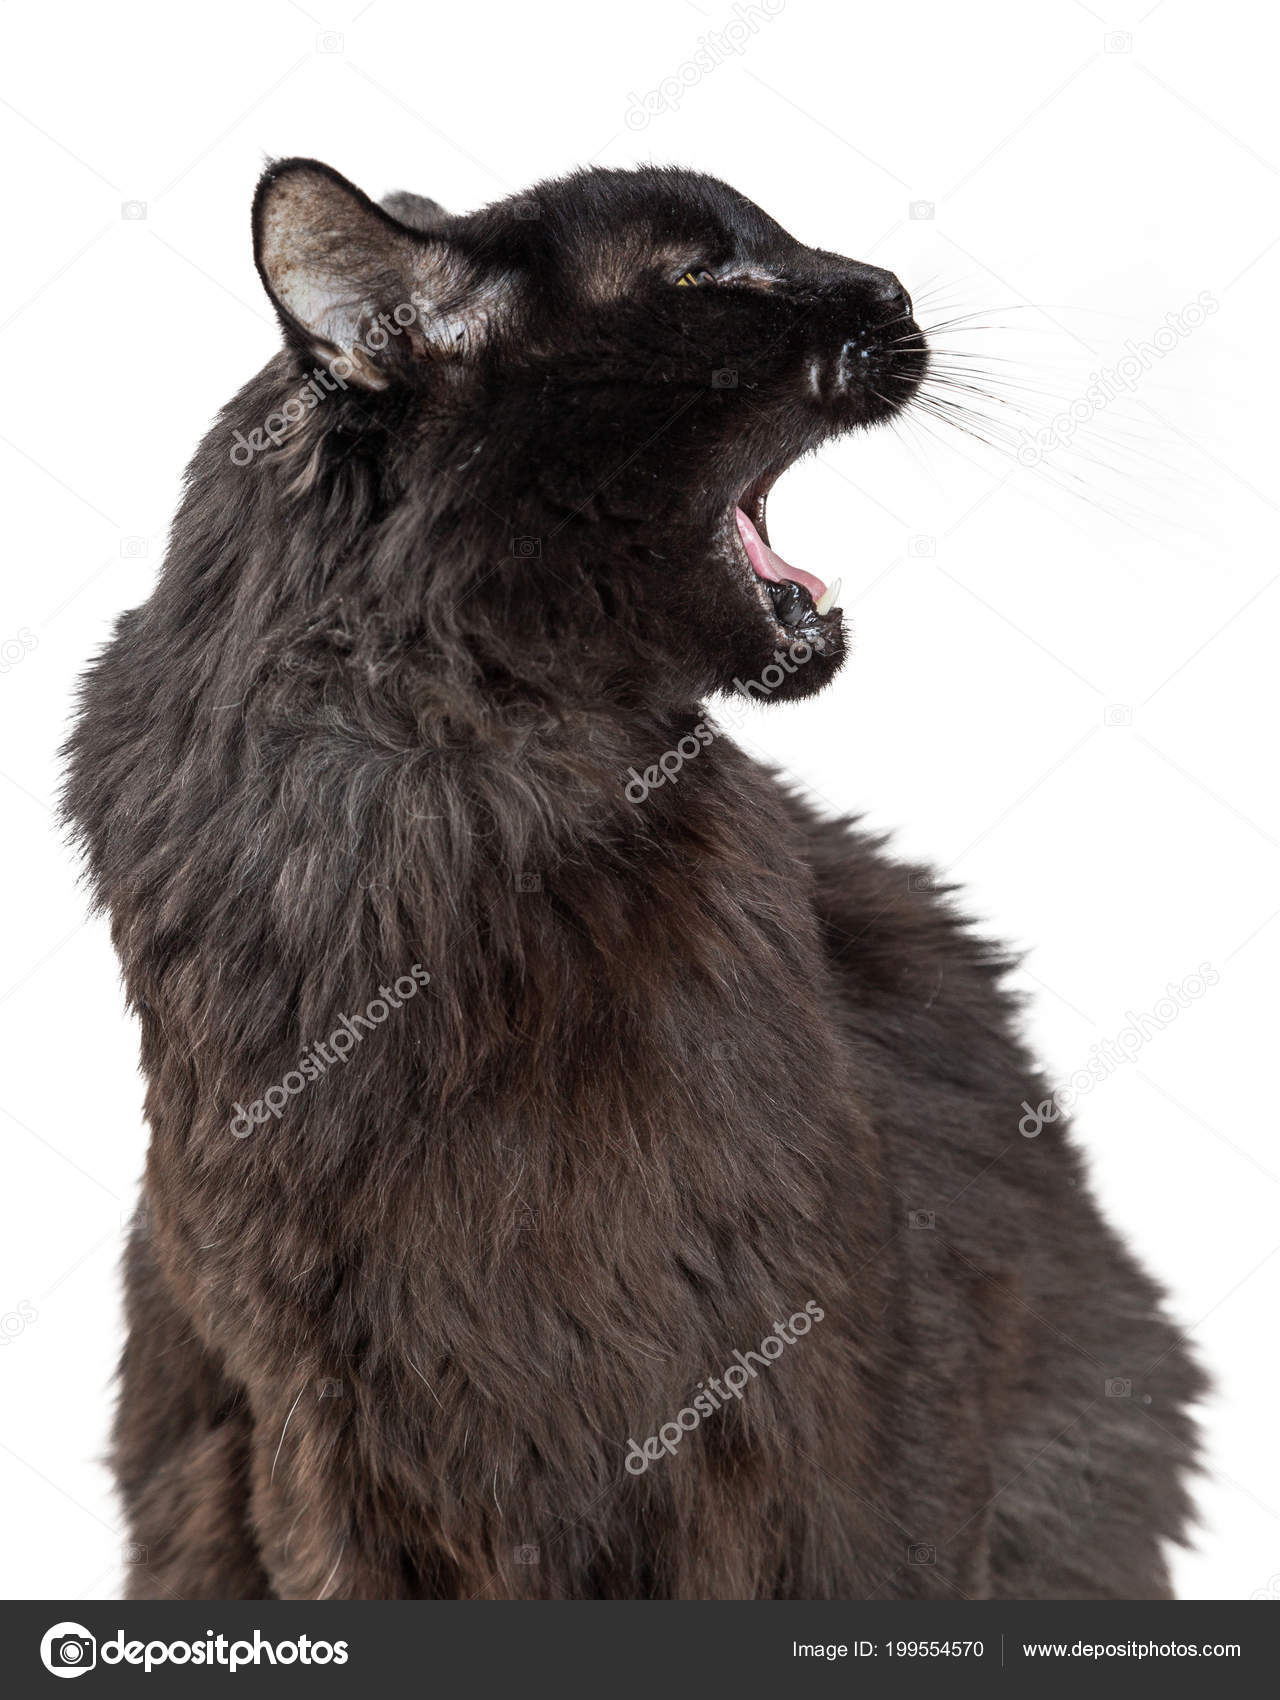 Cat with angry face - License, download or print for £12.40